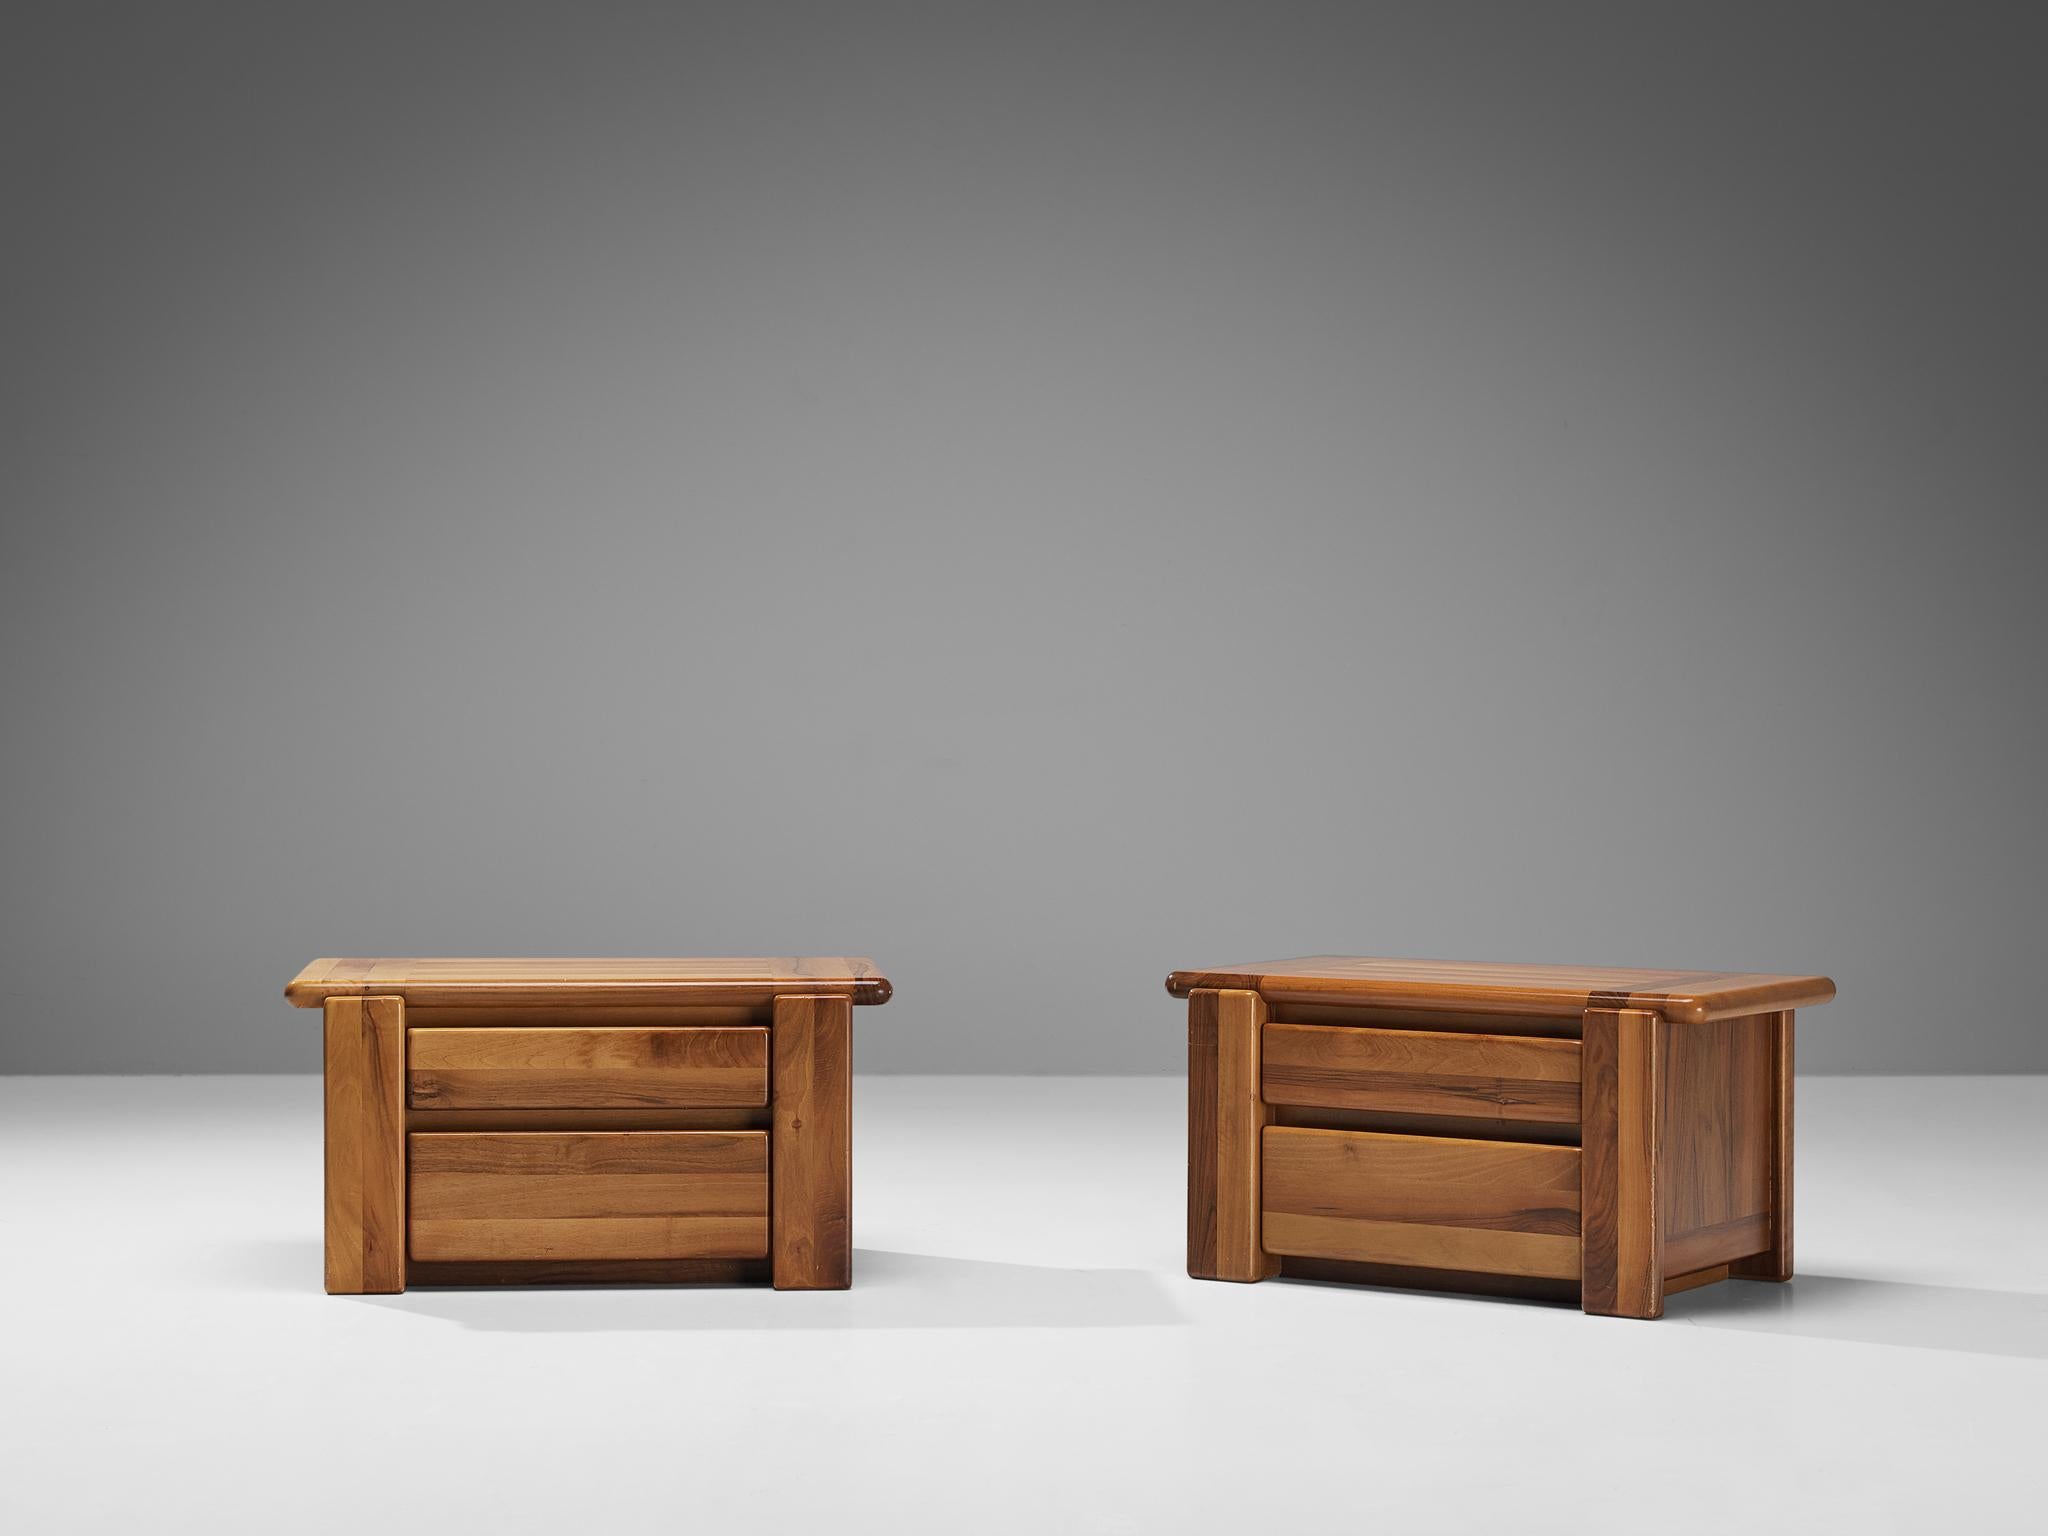 Mario Marenco for Mobil Girgi, pair of bedside tables, walnut, Italy, 1970s 

An exceptional pair of nightstands by the Italian designer, architect, and actor Mario Marenco (1933-2019), featuring a high-level of craftsmanship in woodwork. The whole